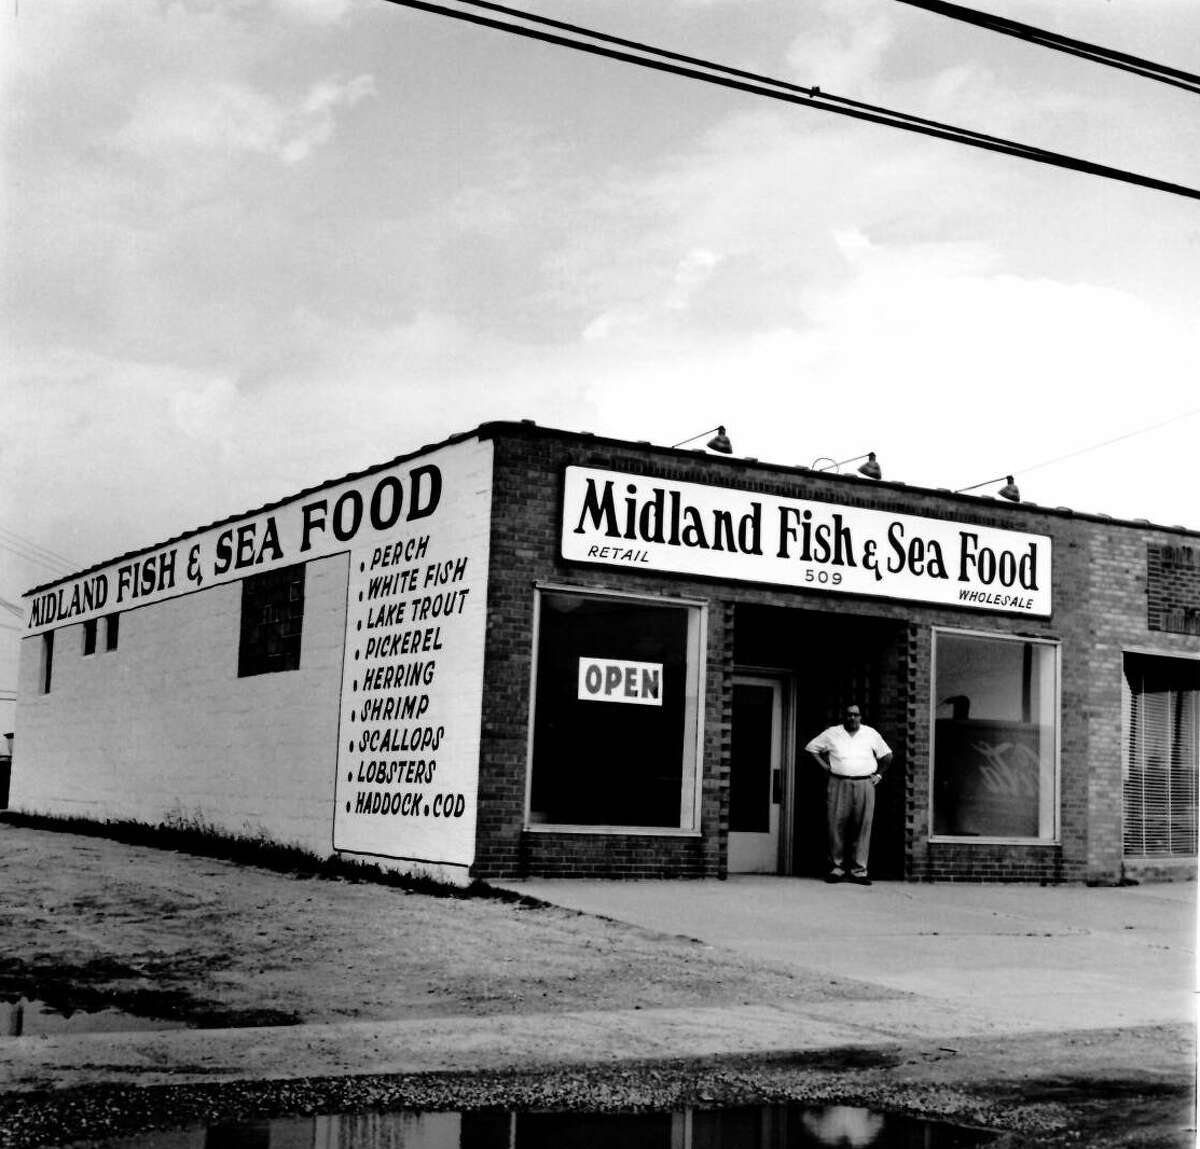 Midland Fish and Seafood, 509 Bay City Road. unknown date